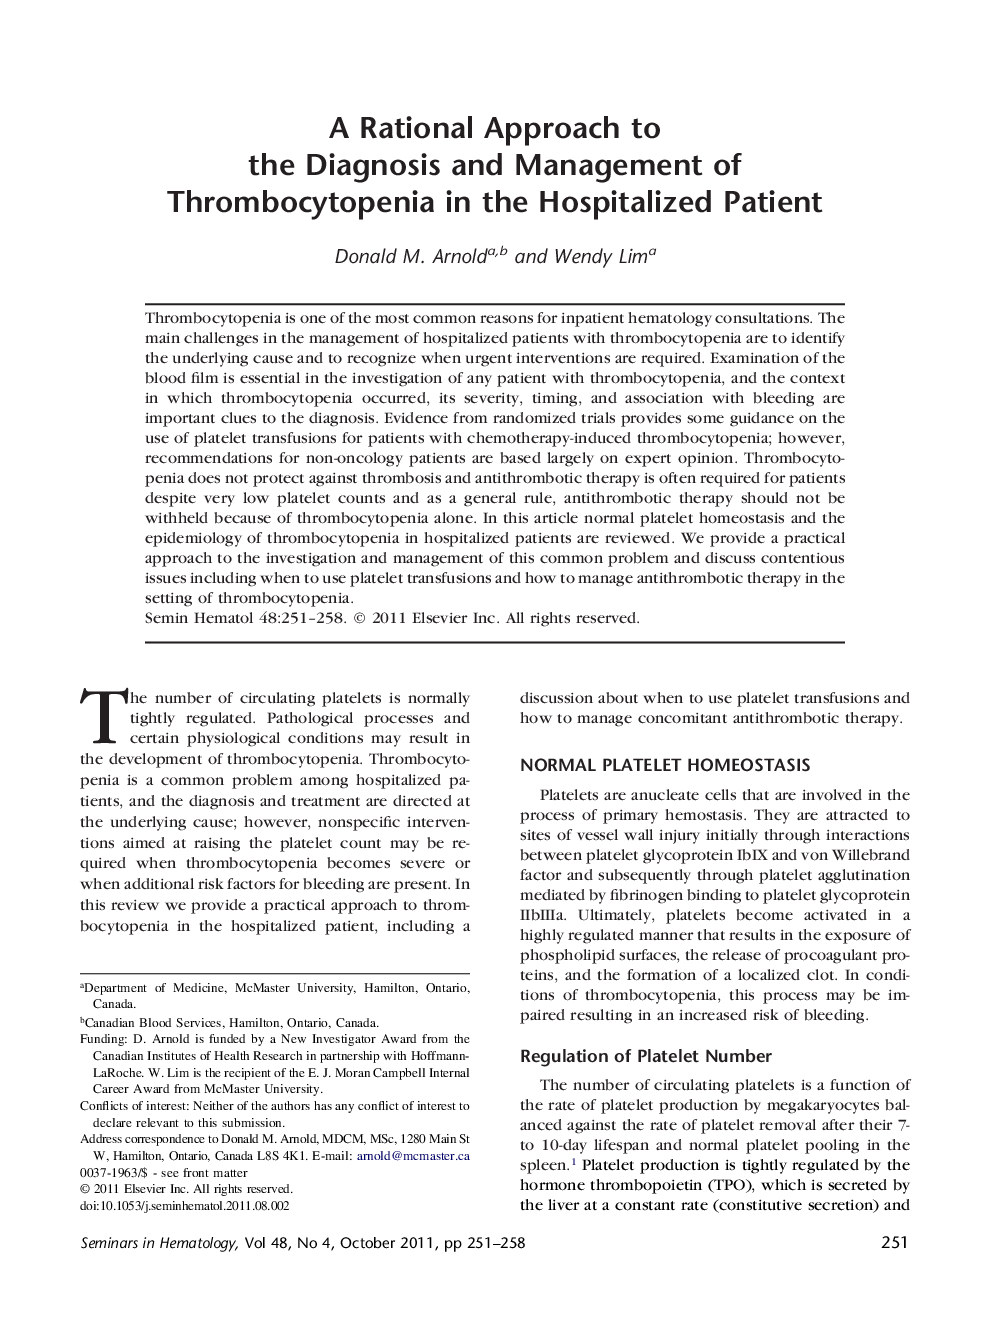 A Rational Approach to the Diagnosis and Management of Thrombocytopenia in the Hospitalized Patient